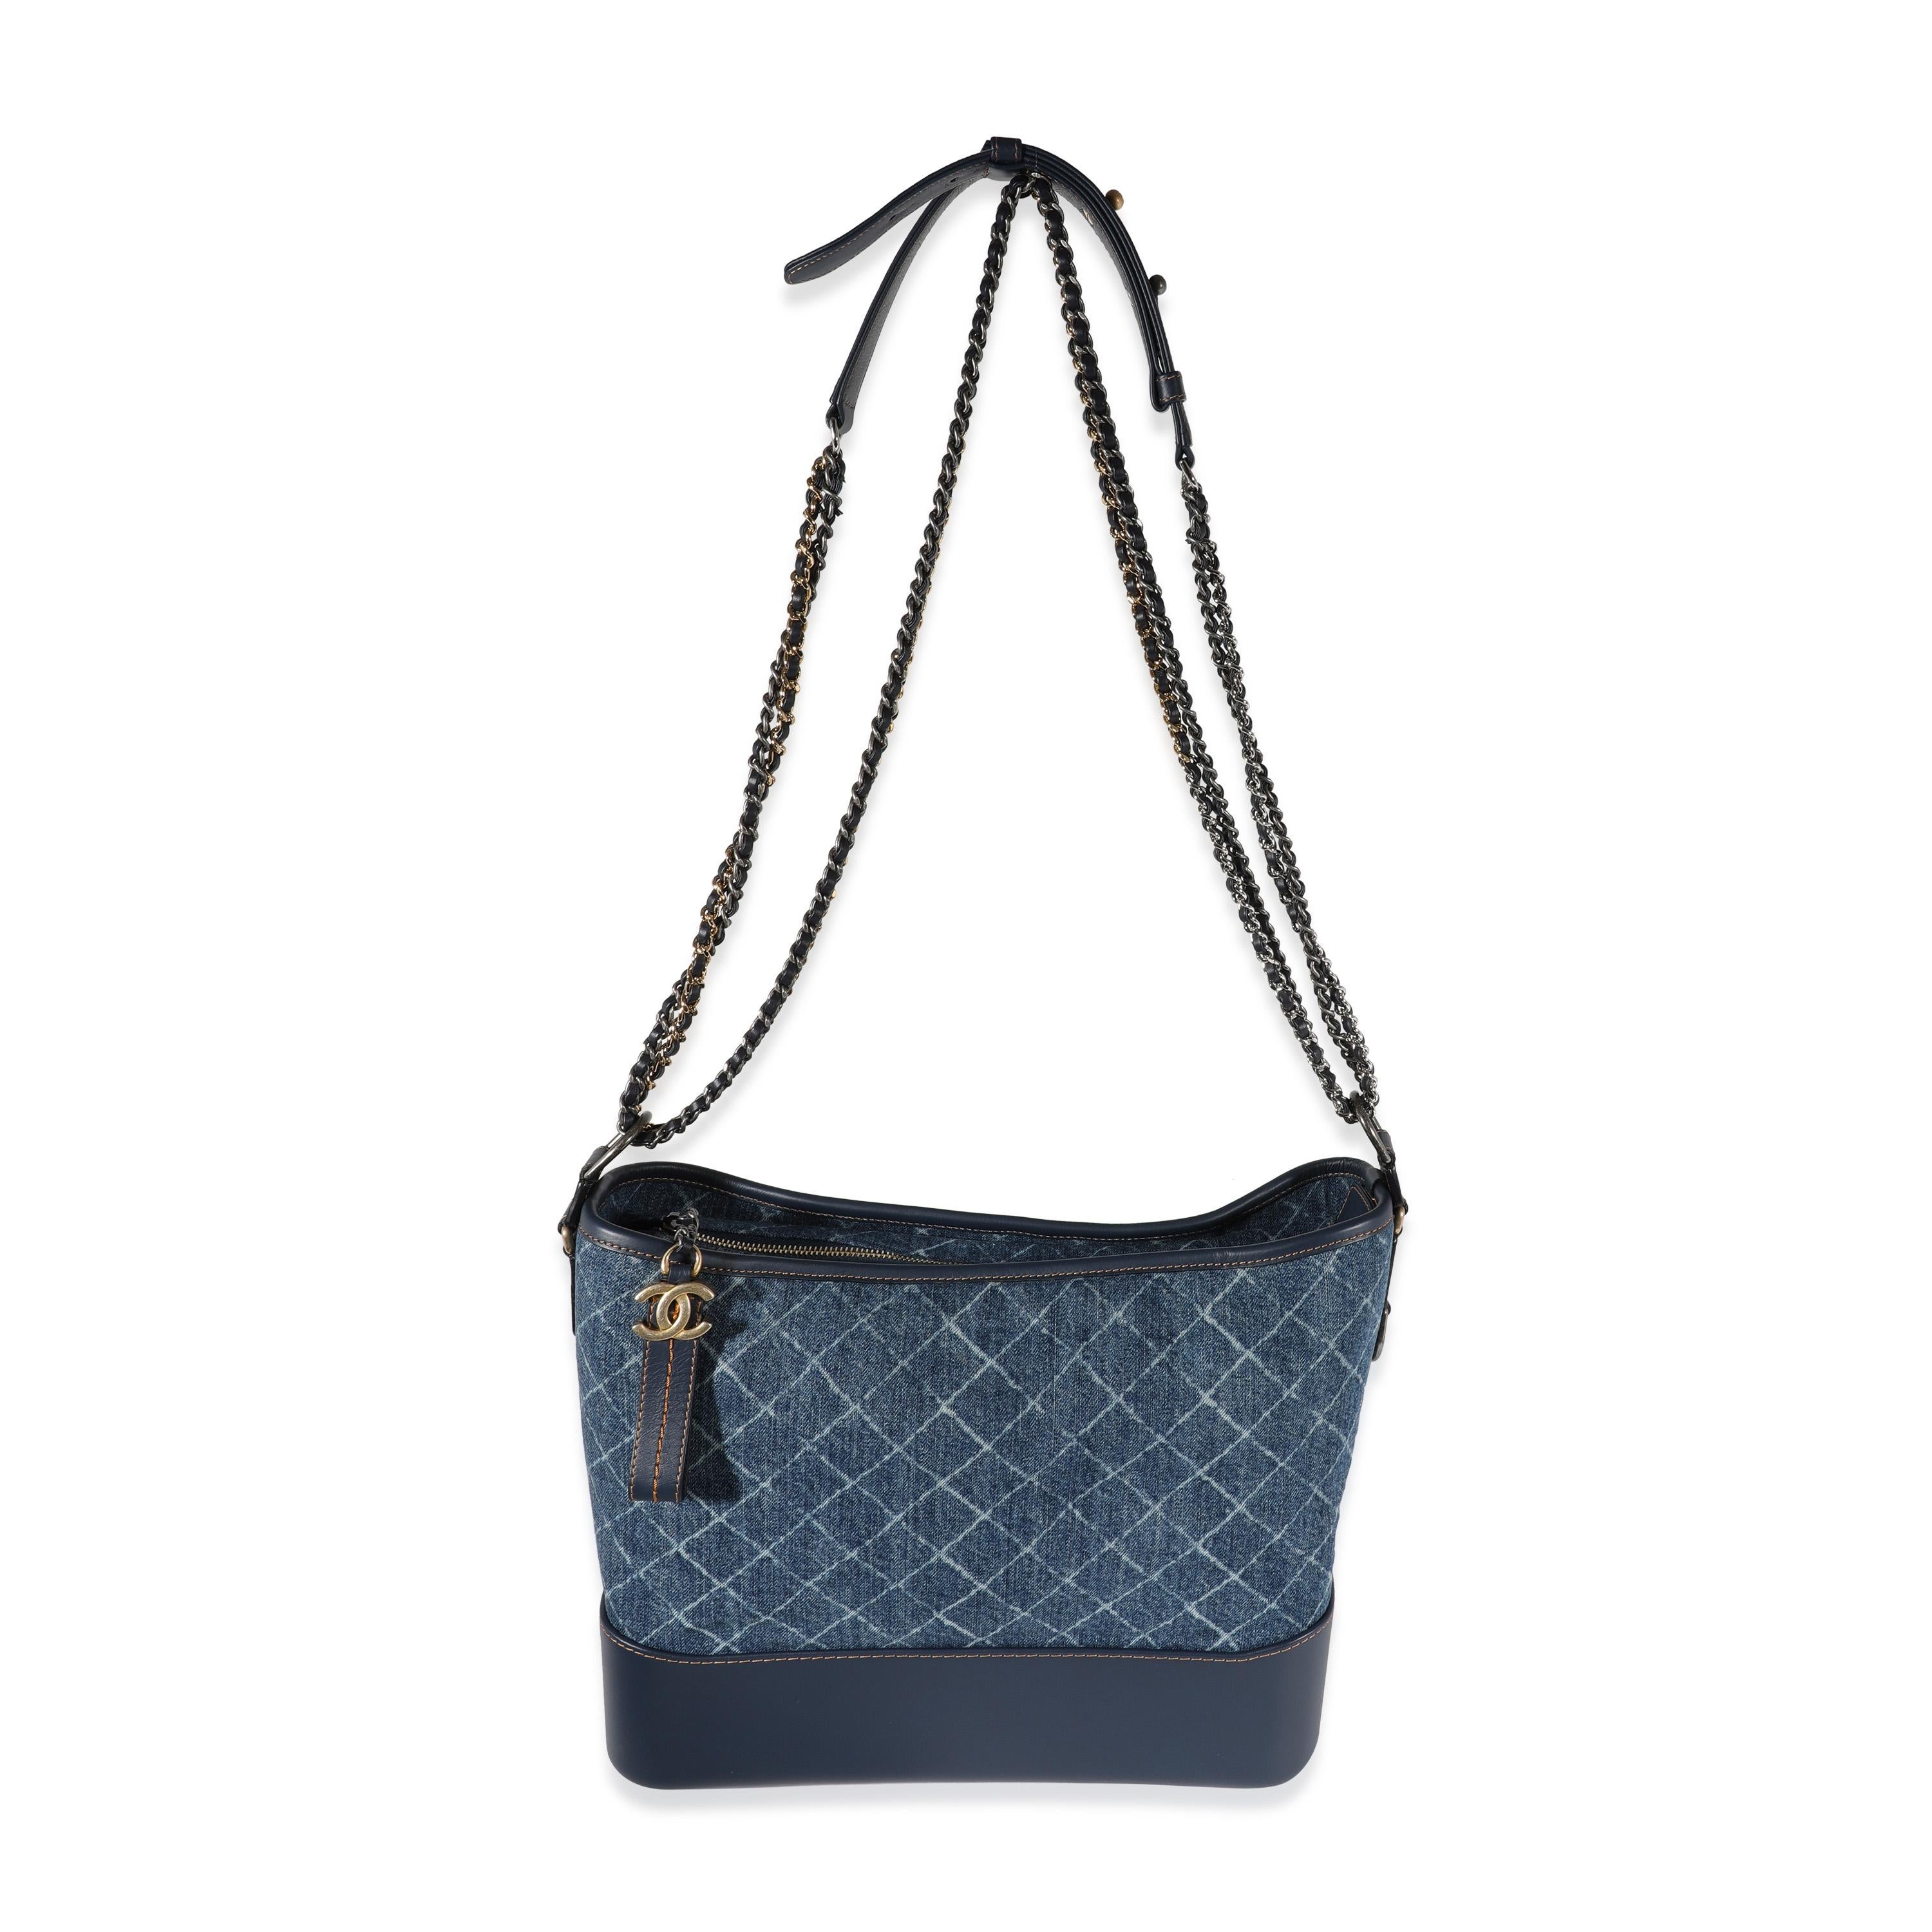 Listing Title: Chanel Blue Quilted Denim & Calfskin Large Gabrielle Hobo
SKU: 121991
MSRP: 4200.00
Condition: Pre-owned 
Handbag Condition: Excellent
Condition Comments: Excellent Condition. Light scuffing to leather base. No other visible signs of